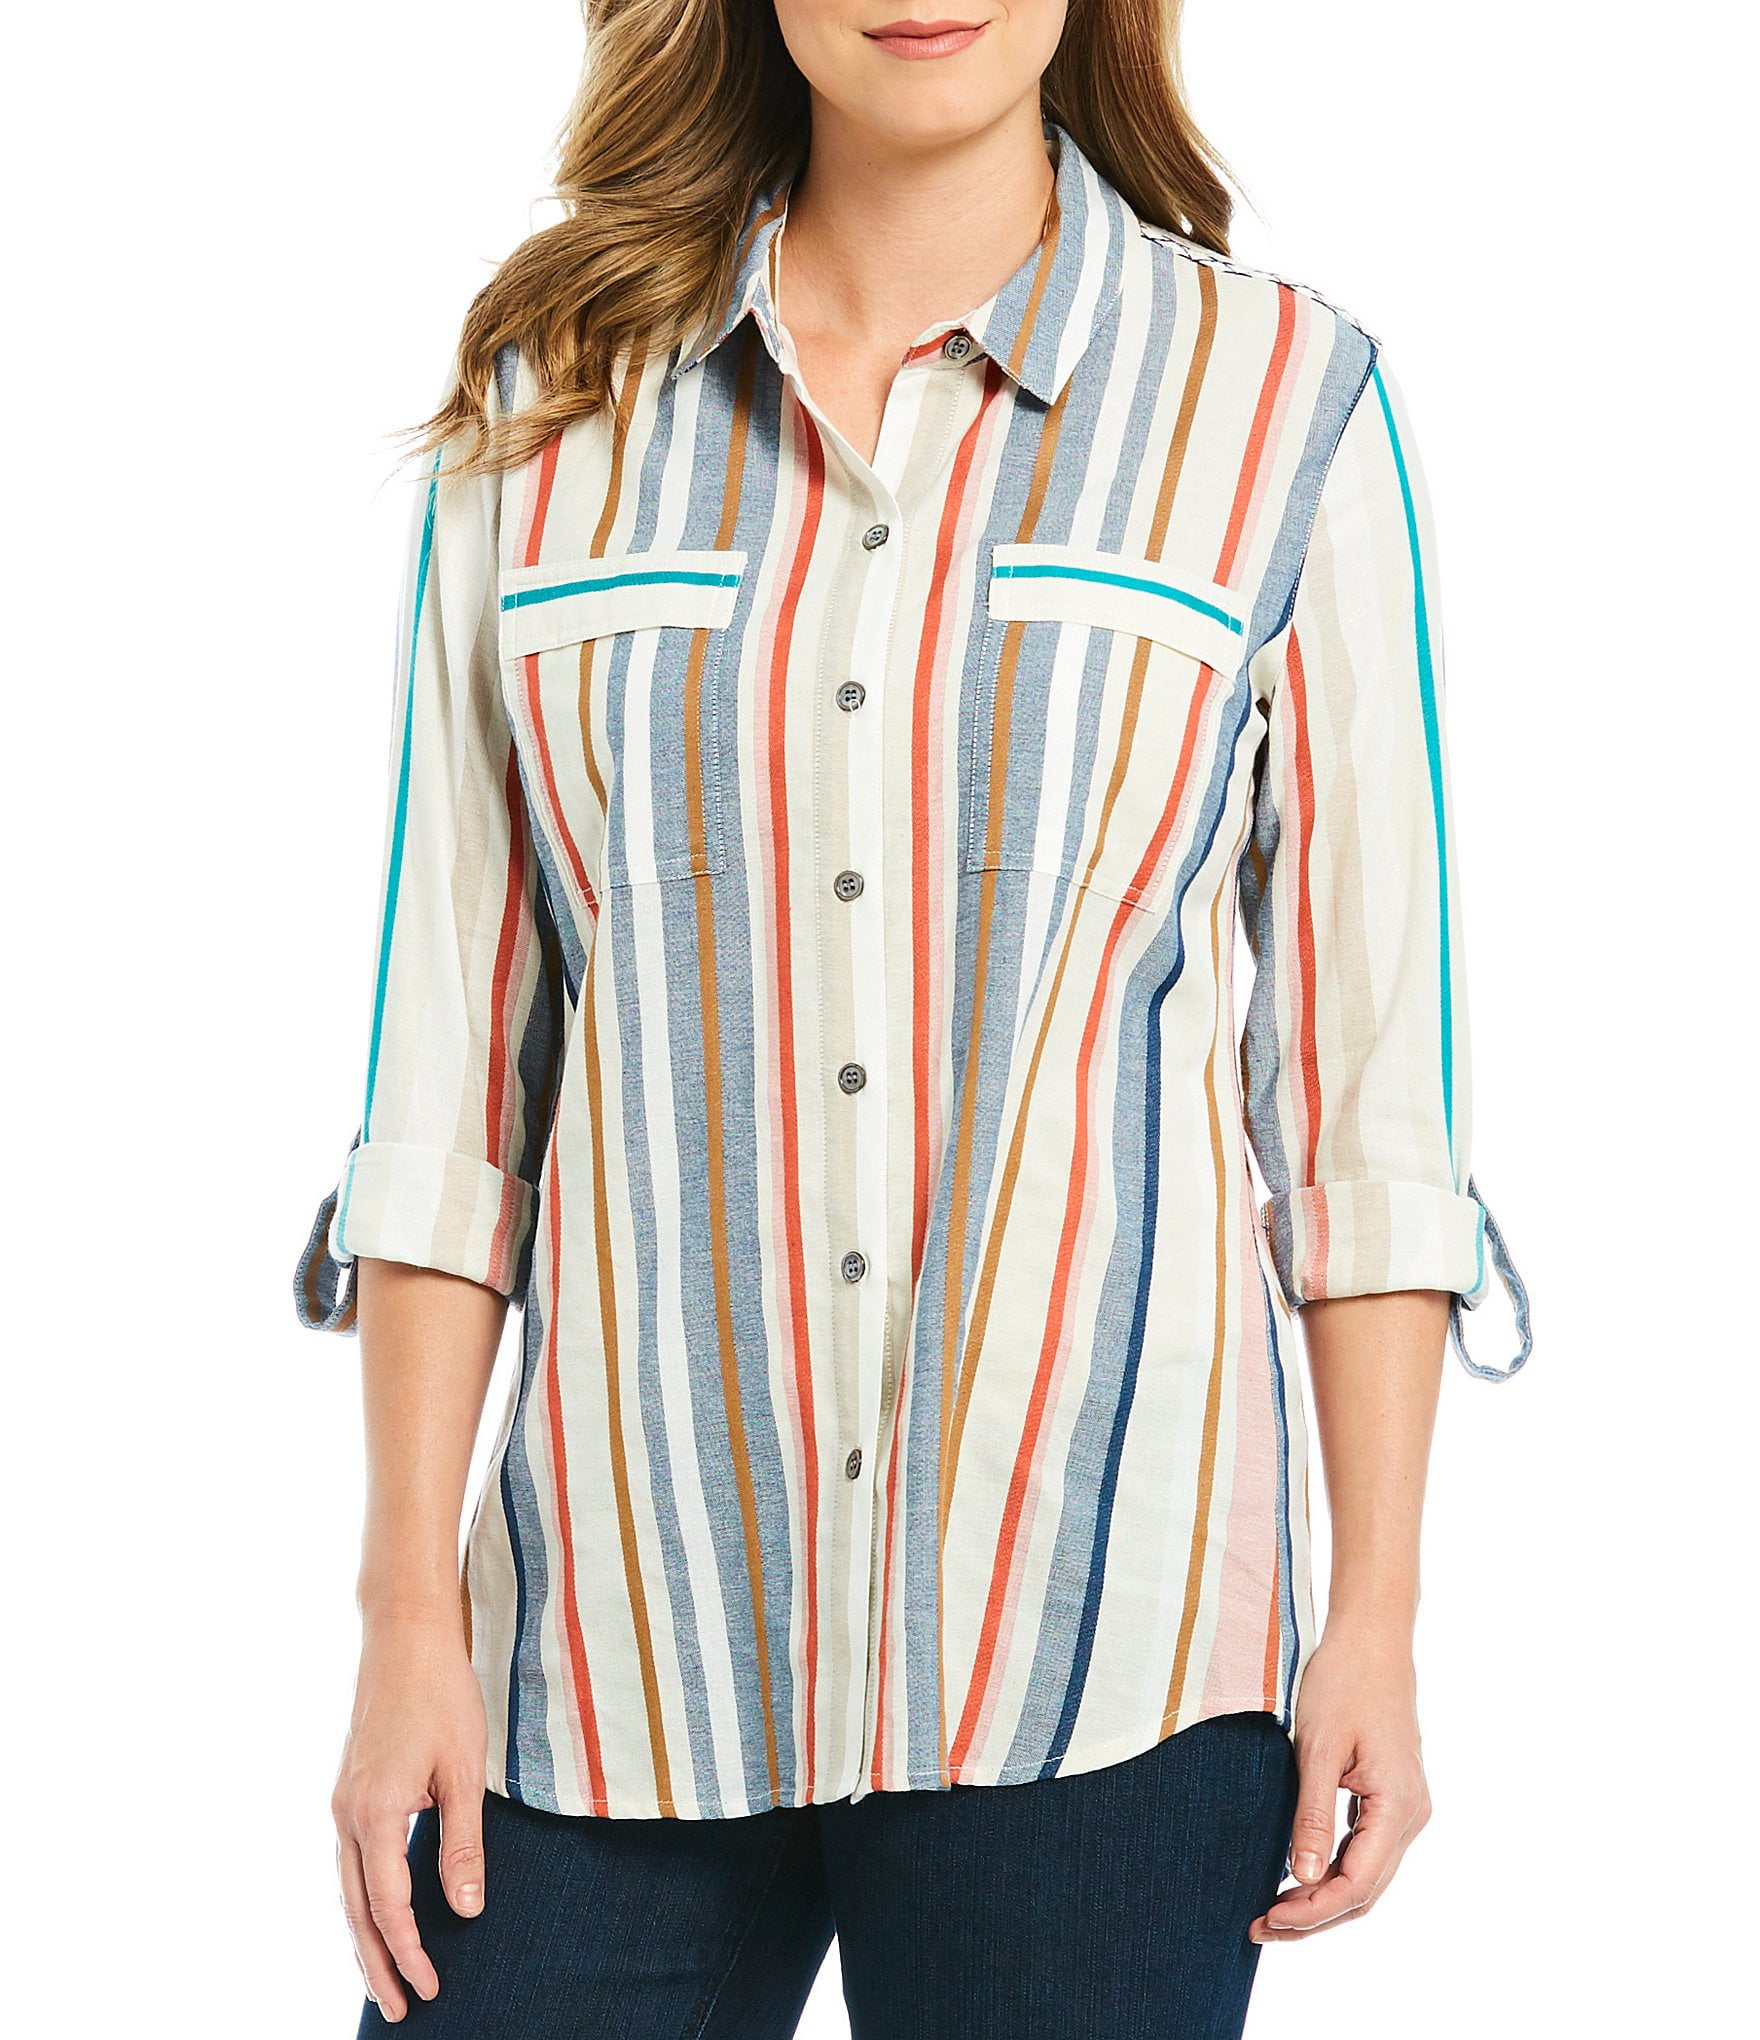 Multiples Clothing Co. - Womens Top Large Button Down Shirt Striped L ...